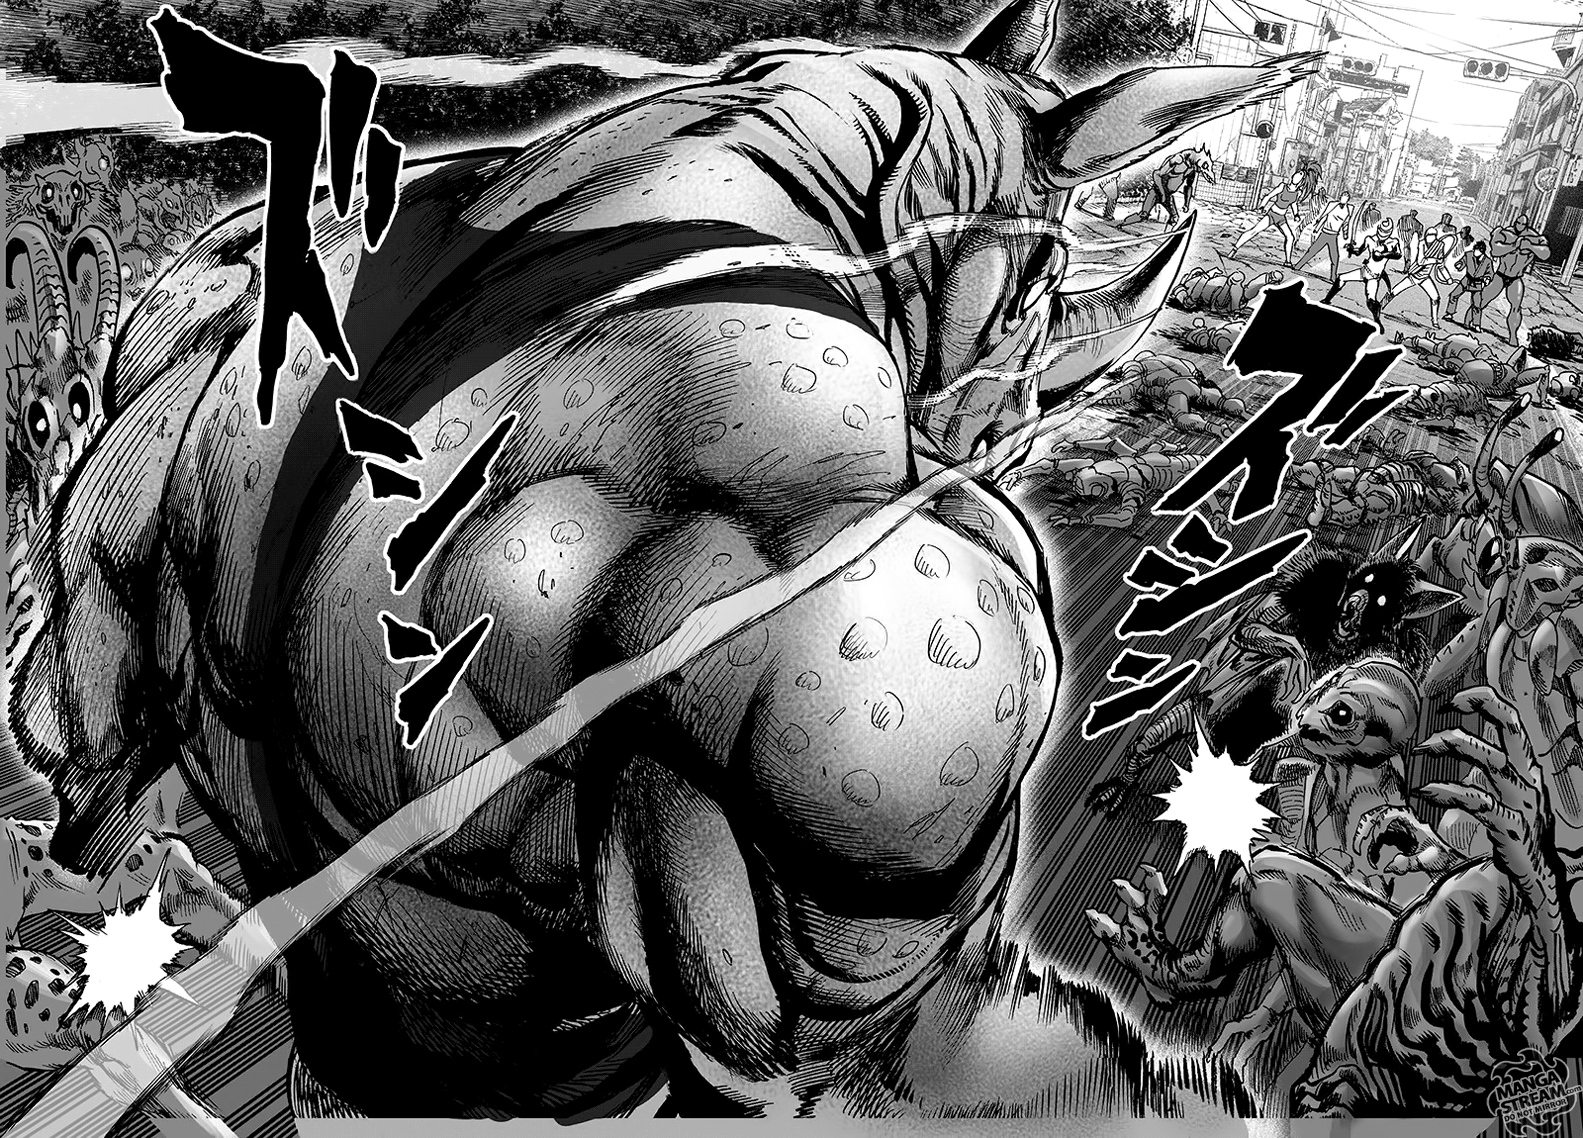 One Punch Man, Chapter 94 - I See image 093